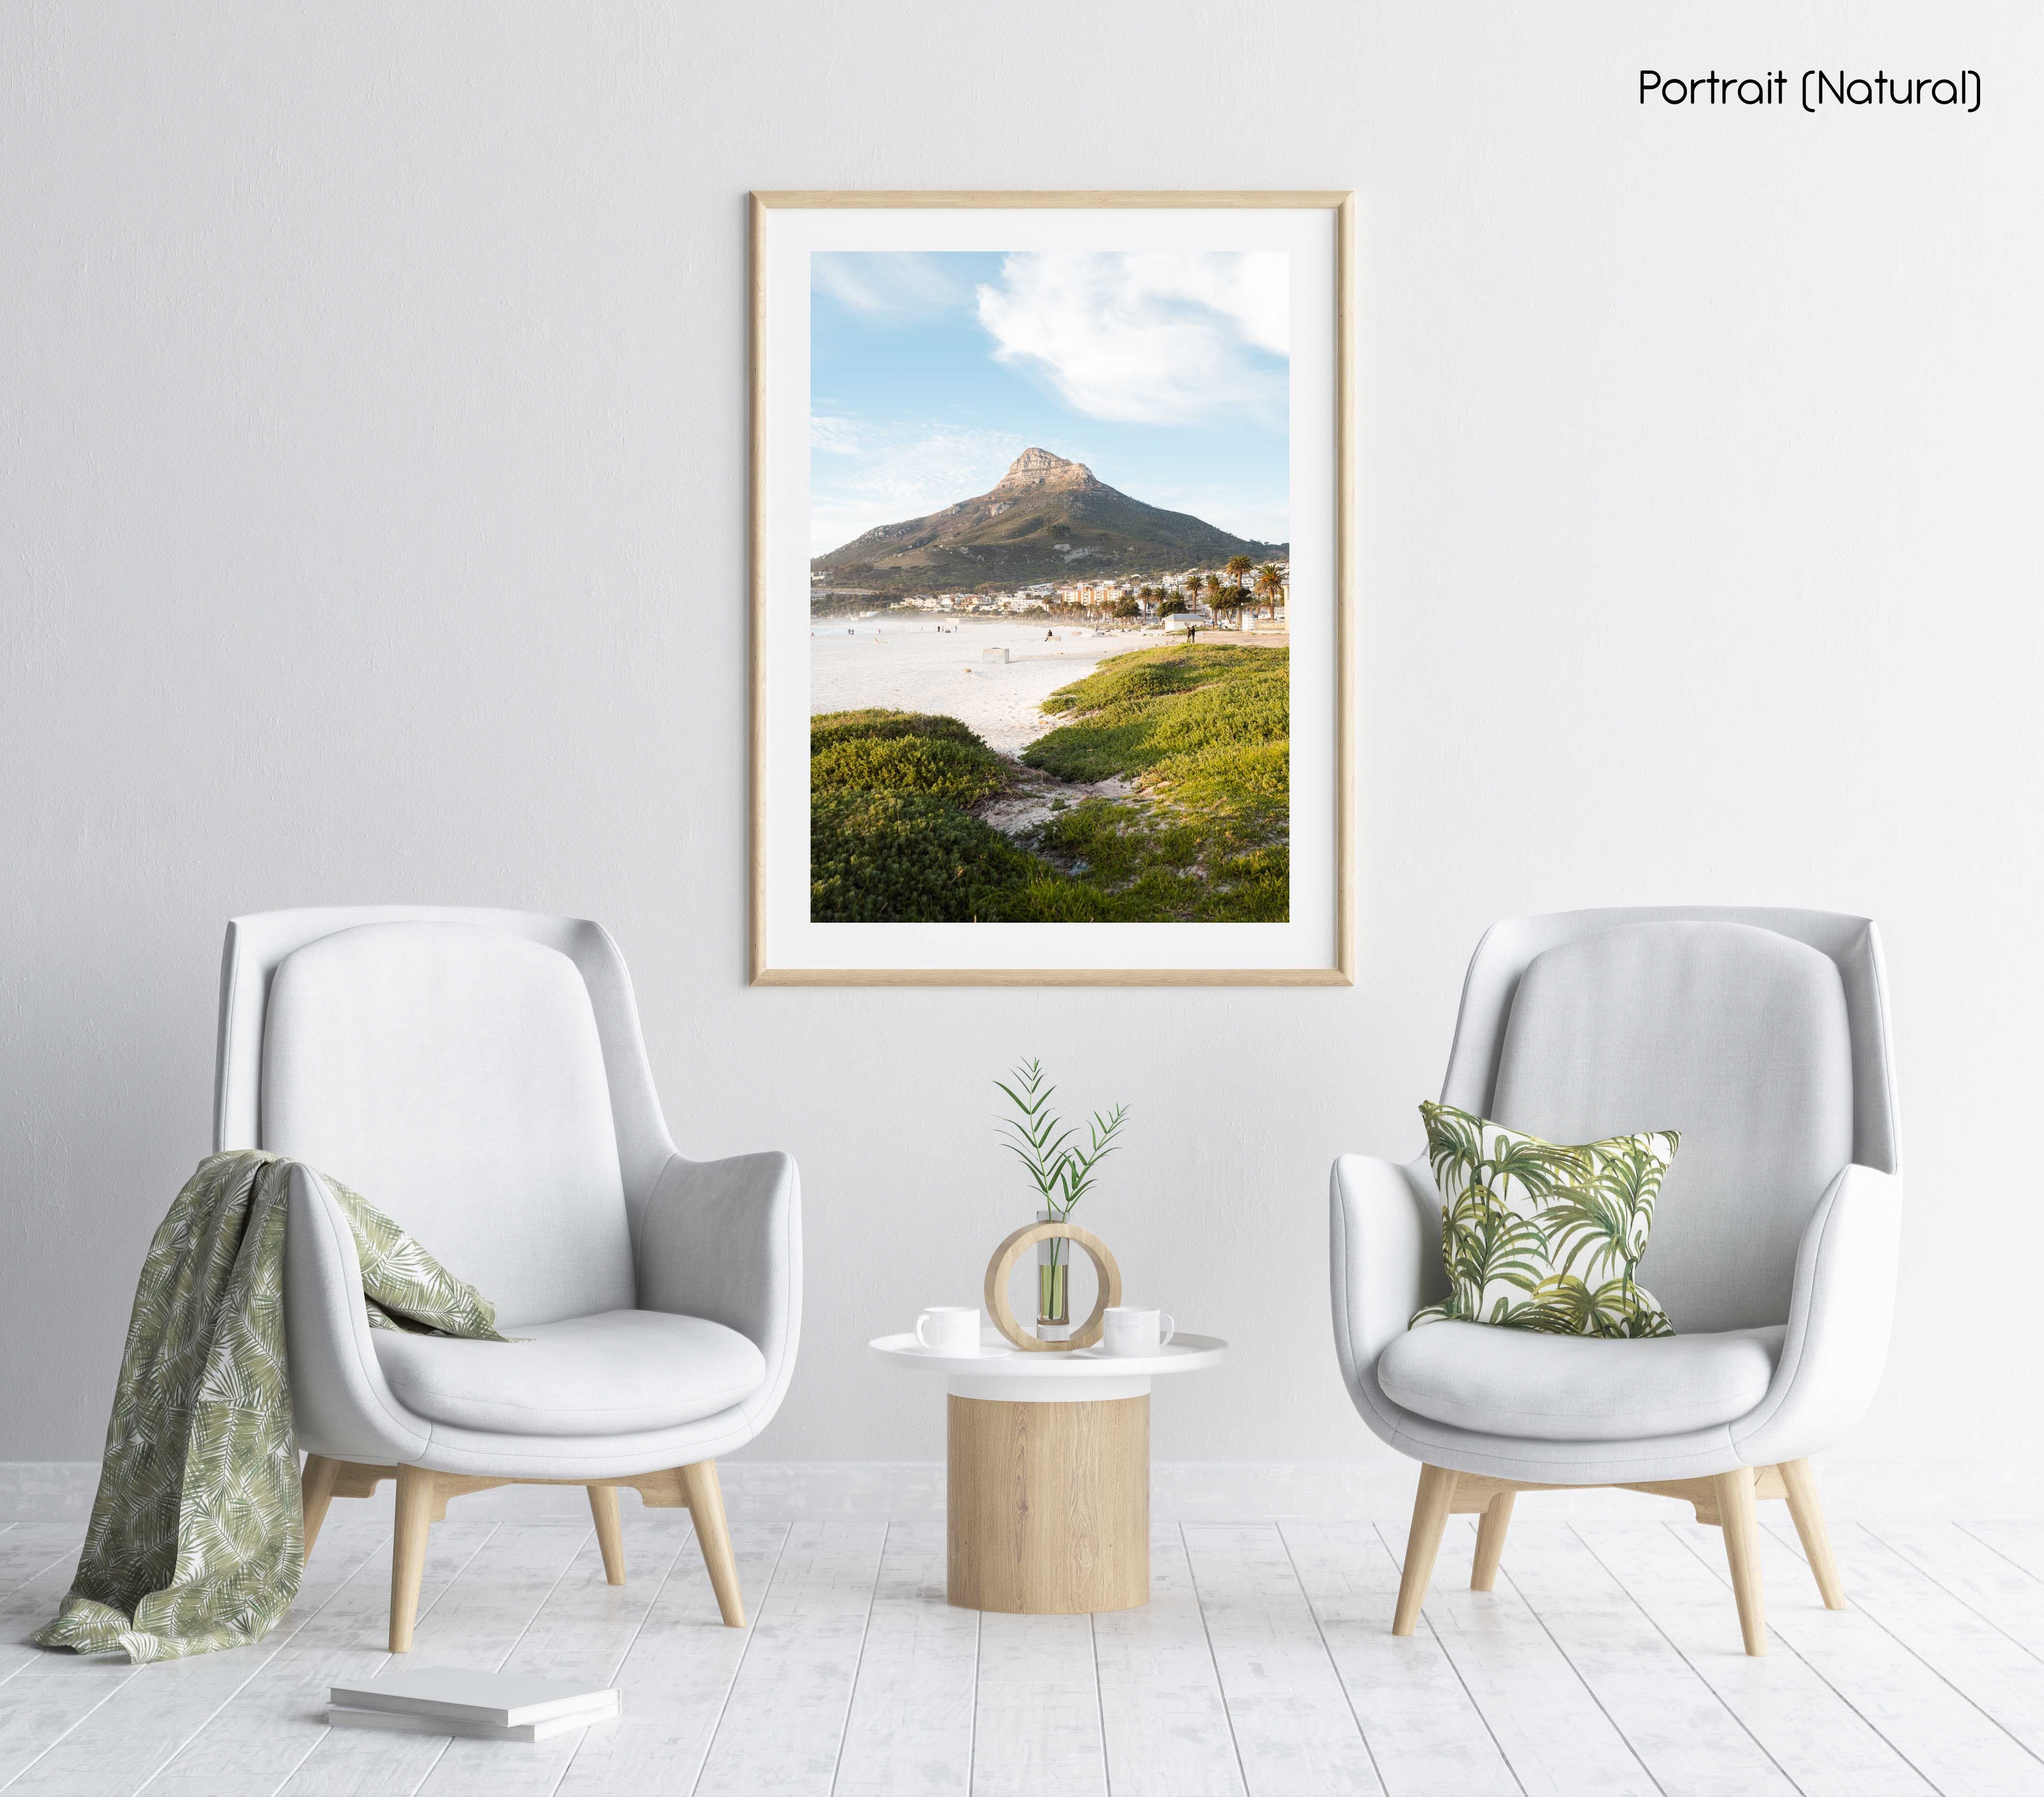 Lions Head seen from Camps Bay beach with green grass in a natural fine art frame